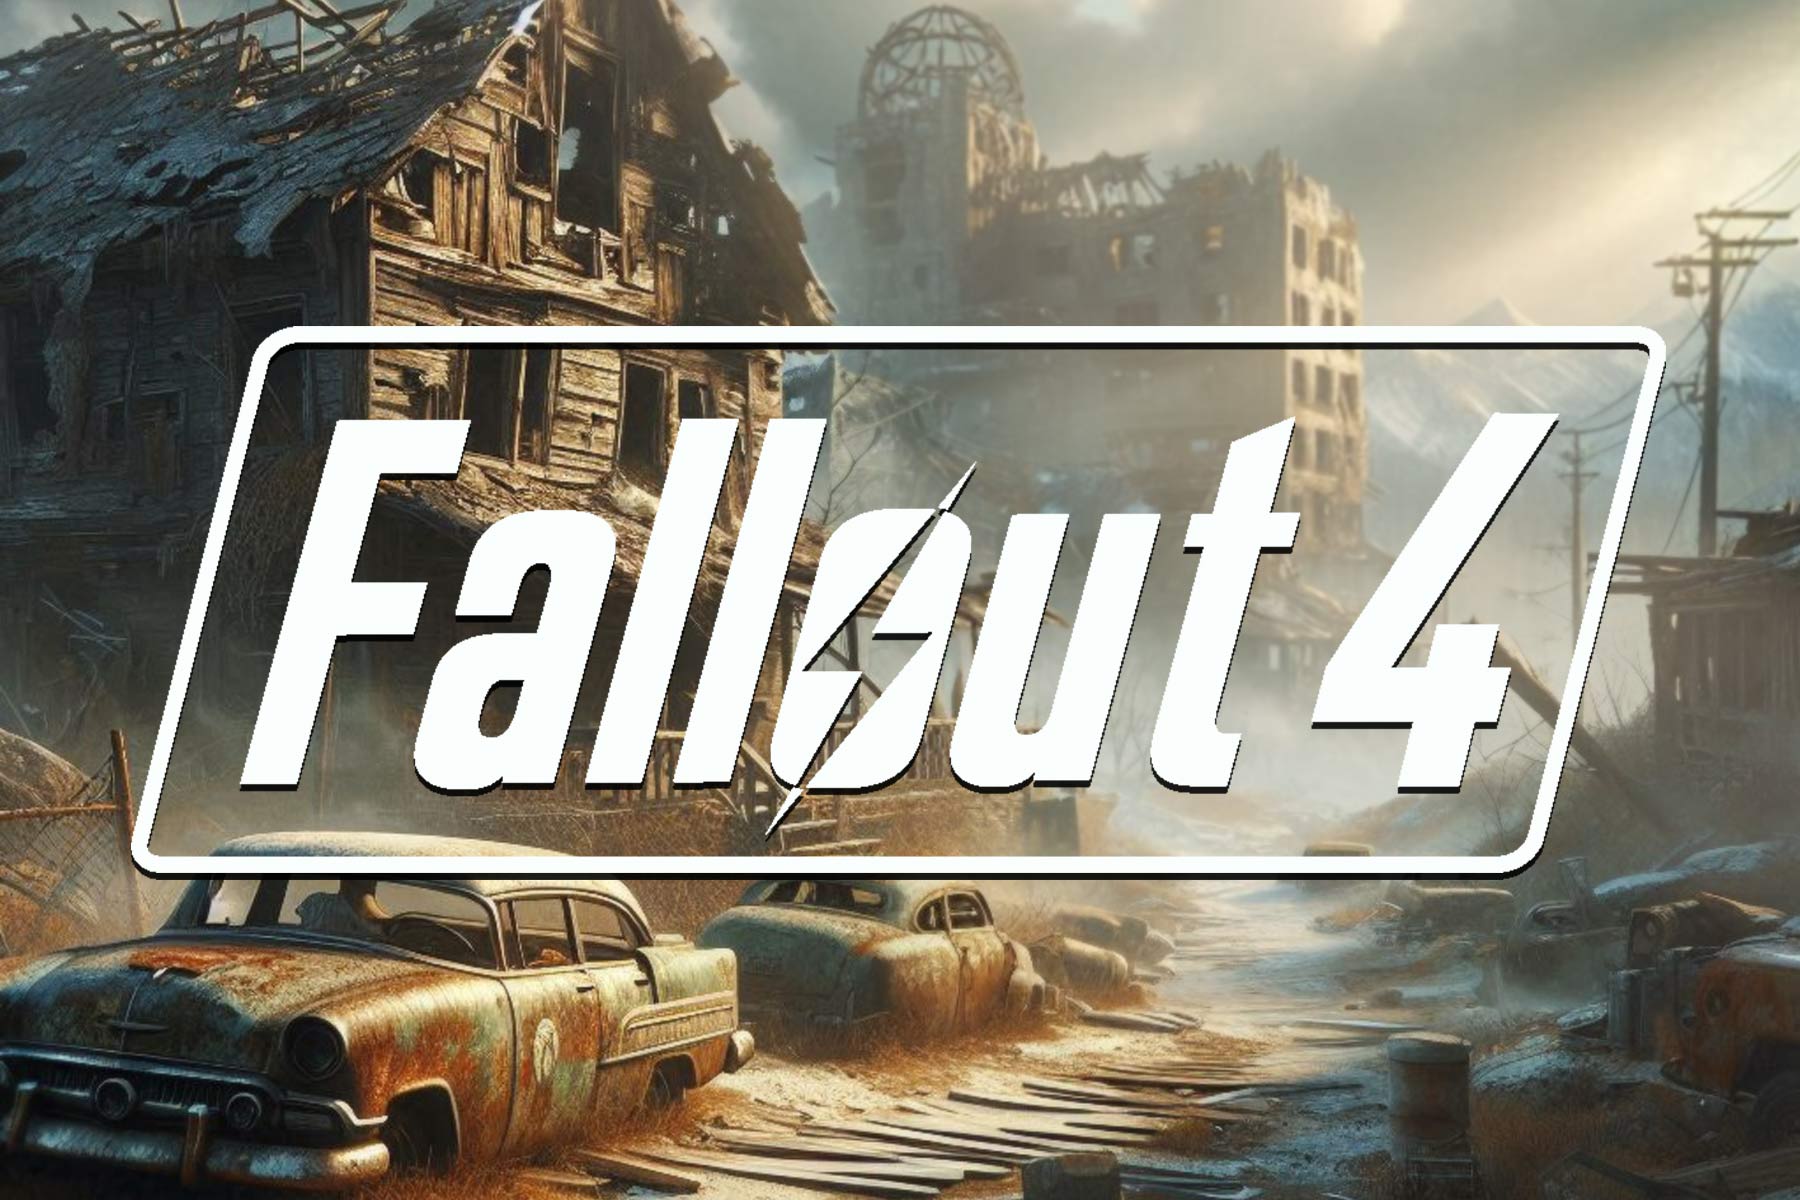 Fallout 4 next-gen update plagued by widescreen issues on PC, workaround is available